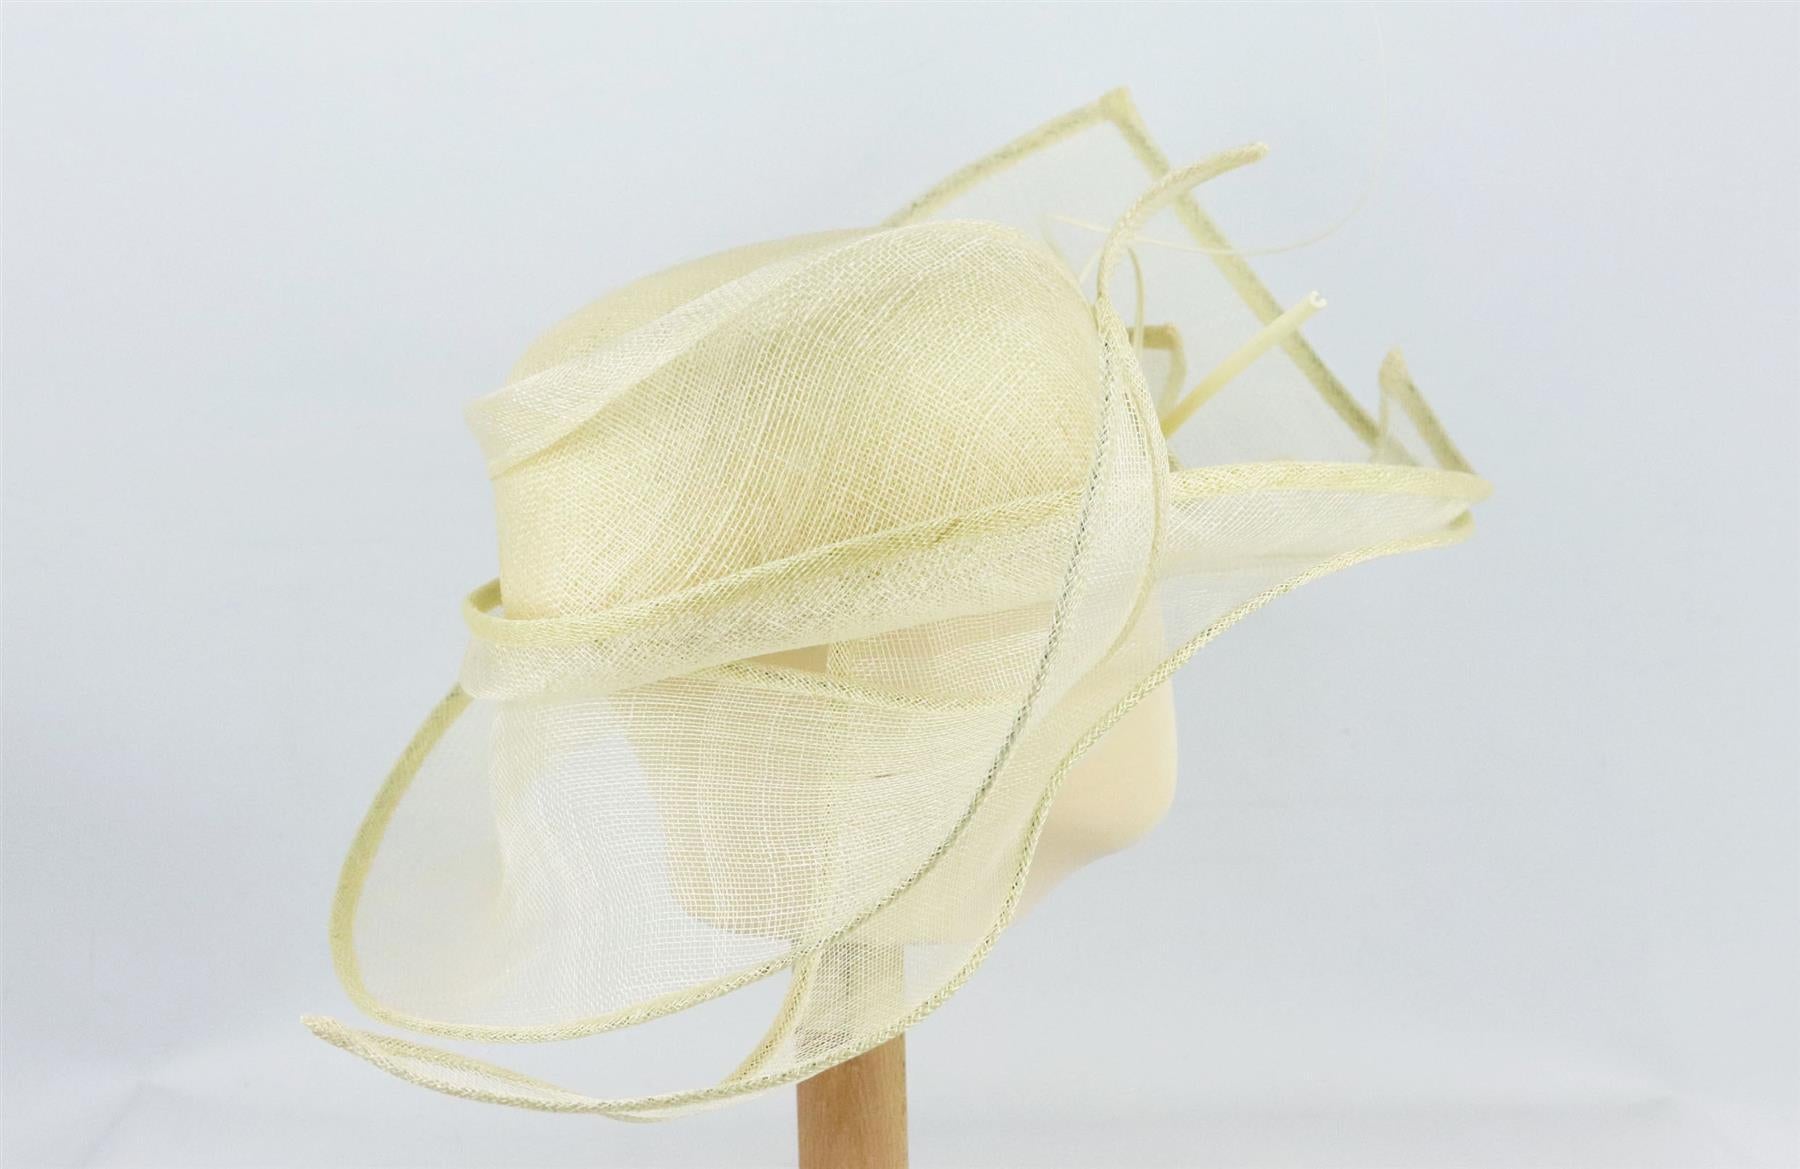 This hat by Rae Oakley is made from cream sinamay straw in a structured sweeping silhouette and finished with a bow detail along the front. Cream straw. Slips on. 100% Straw. Comes with box. Dimensions: H 6.5 x W 23 inches. Circumference: 21.3